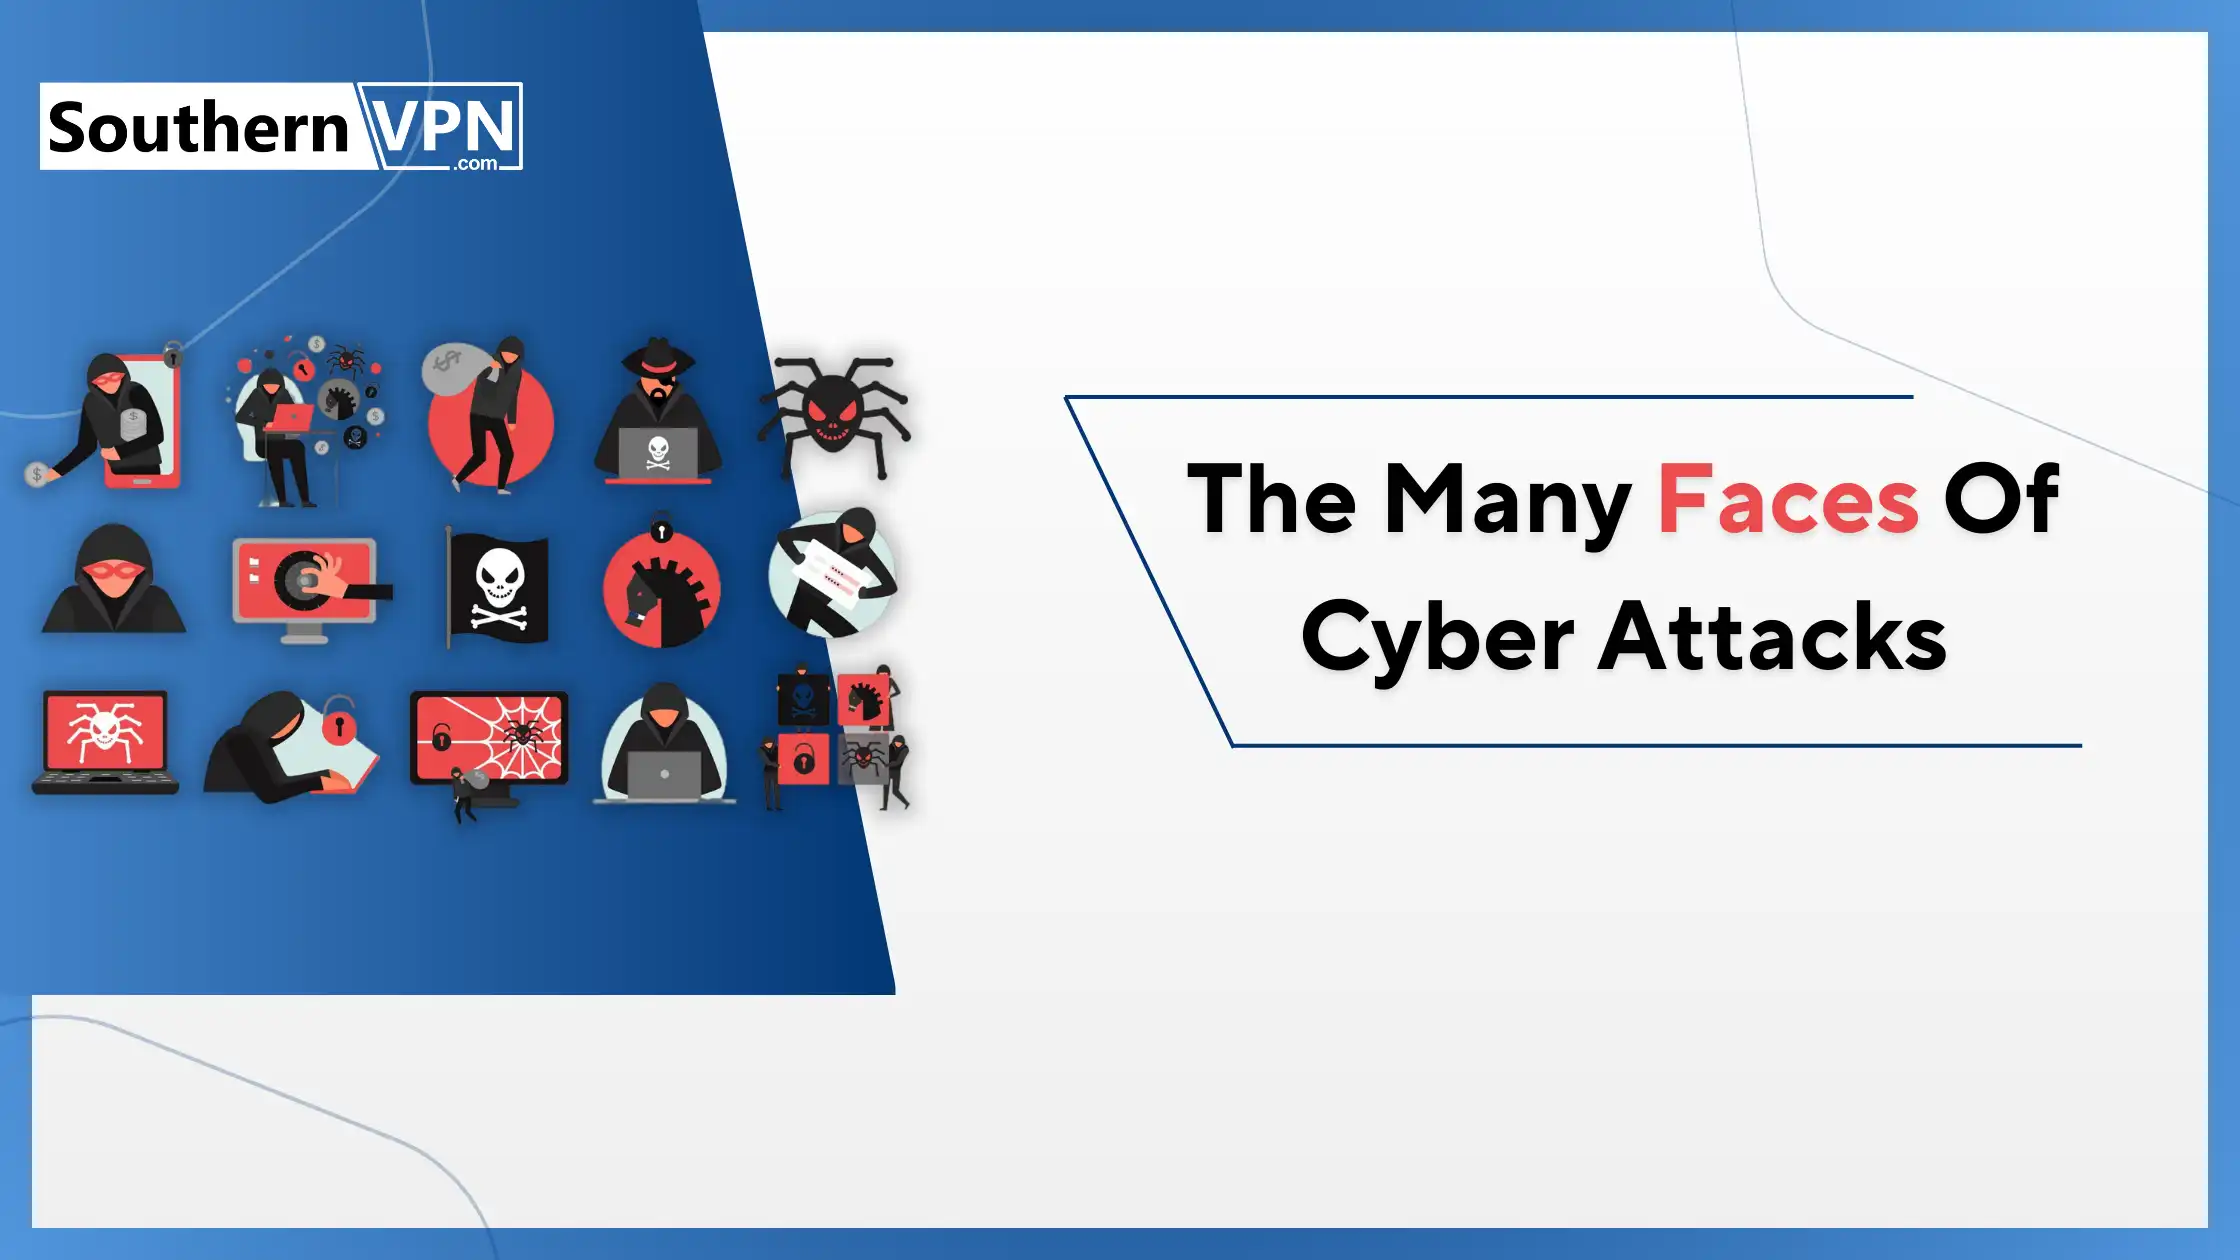 Illustration showing various icons representing different cyber attacks, highlighting types of cyber attacks.